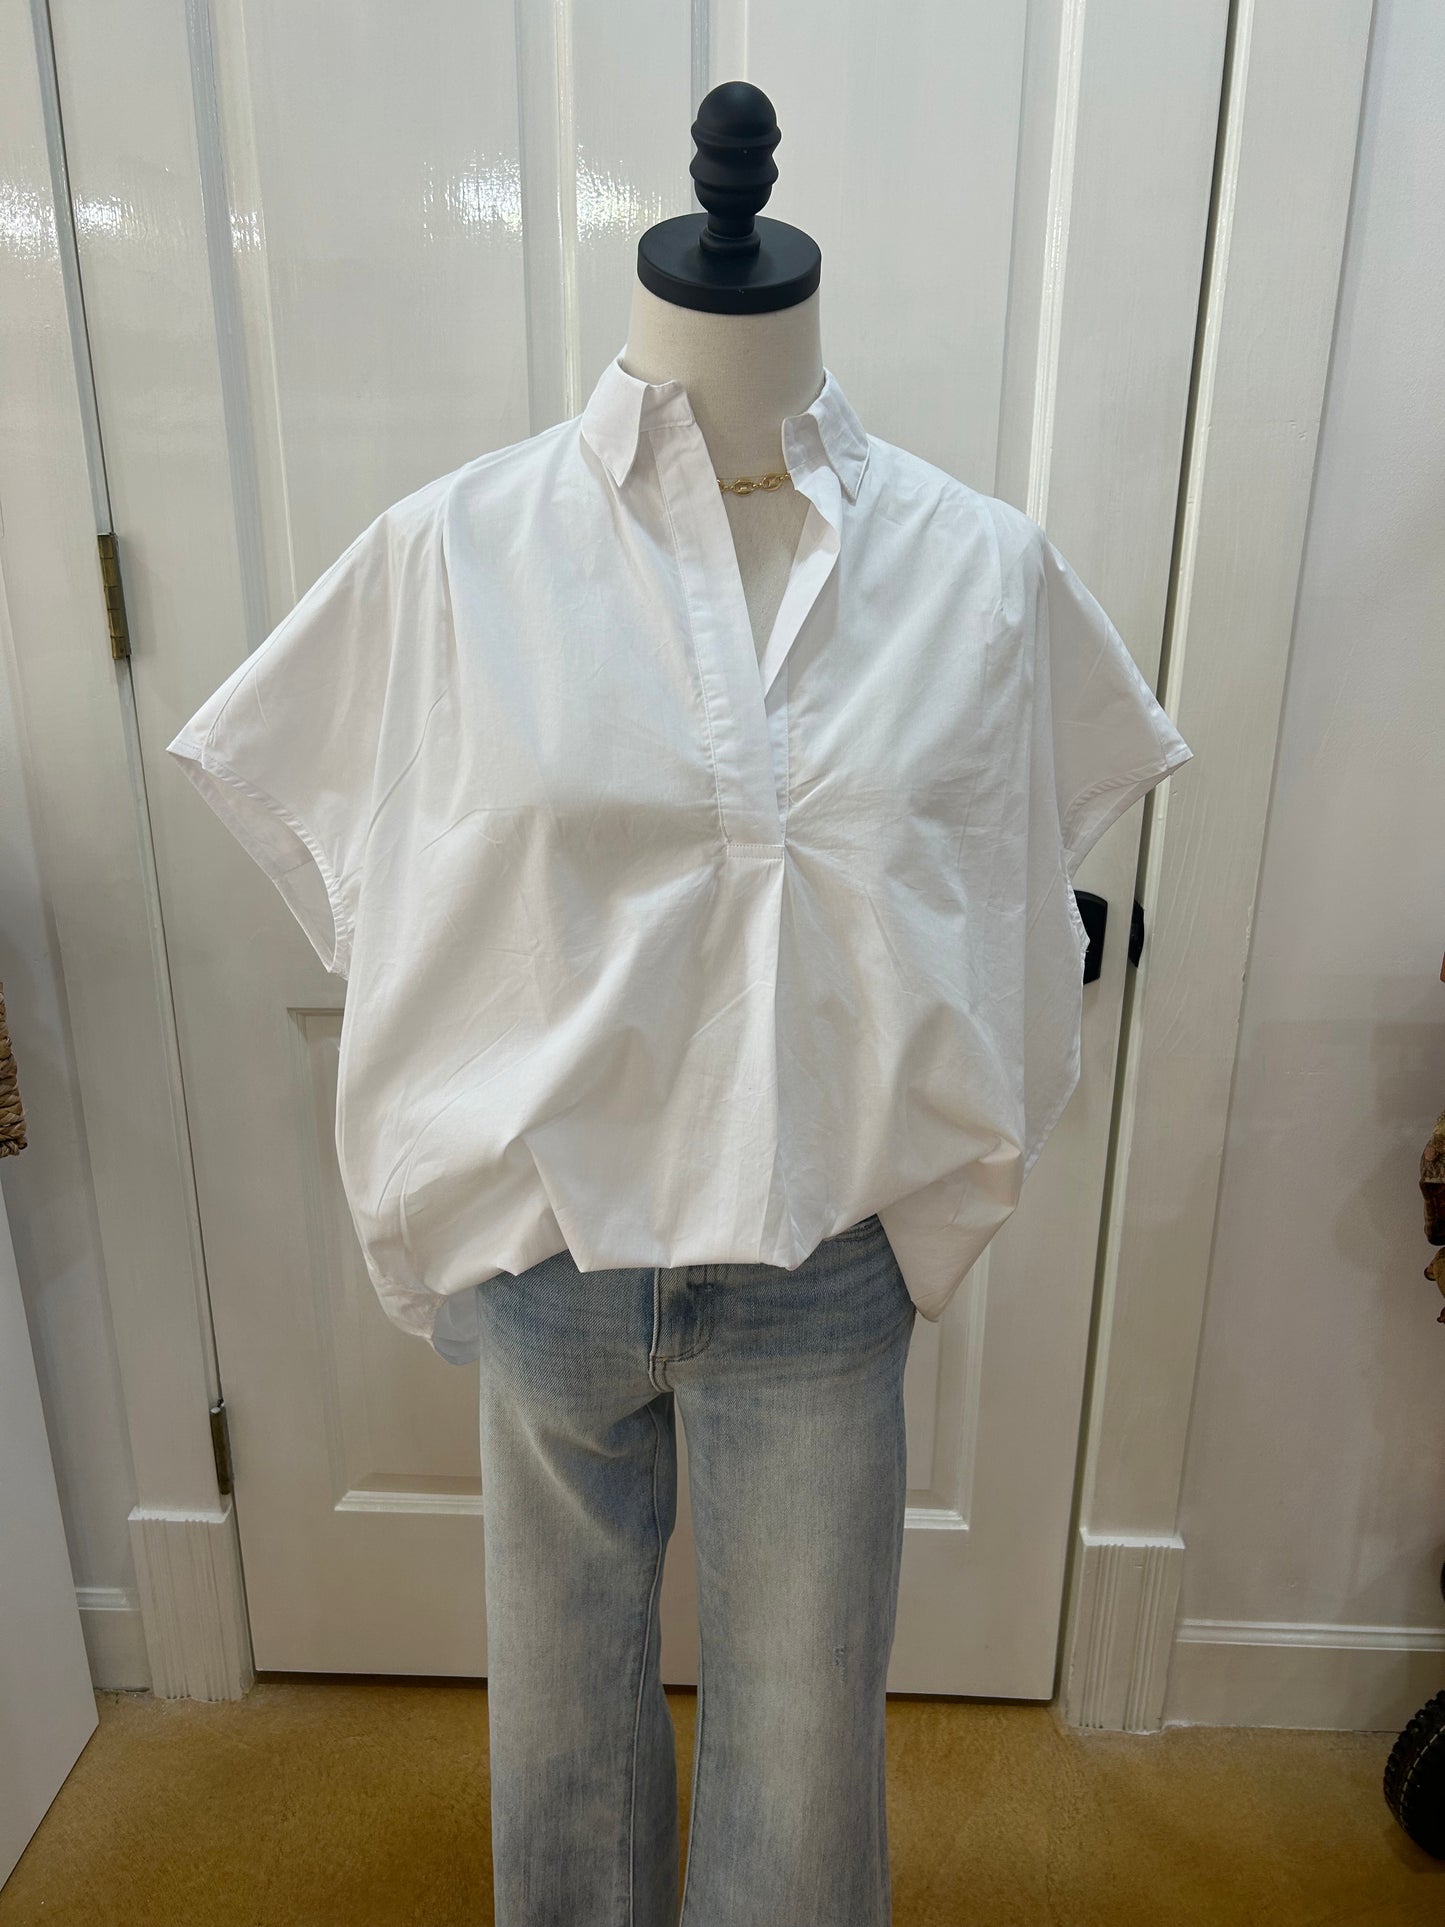 French Connection Rhodes Poplin Top White